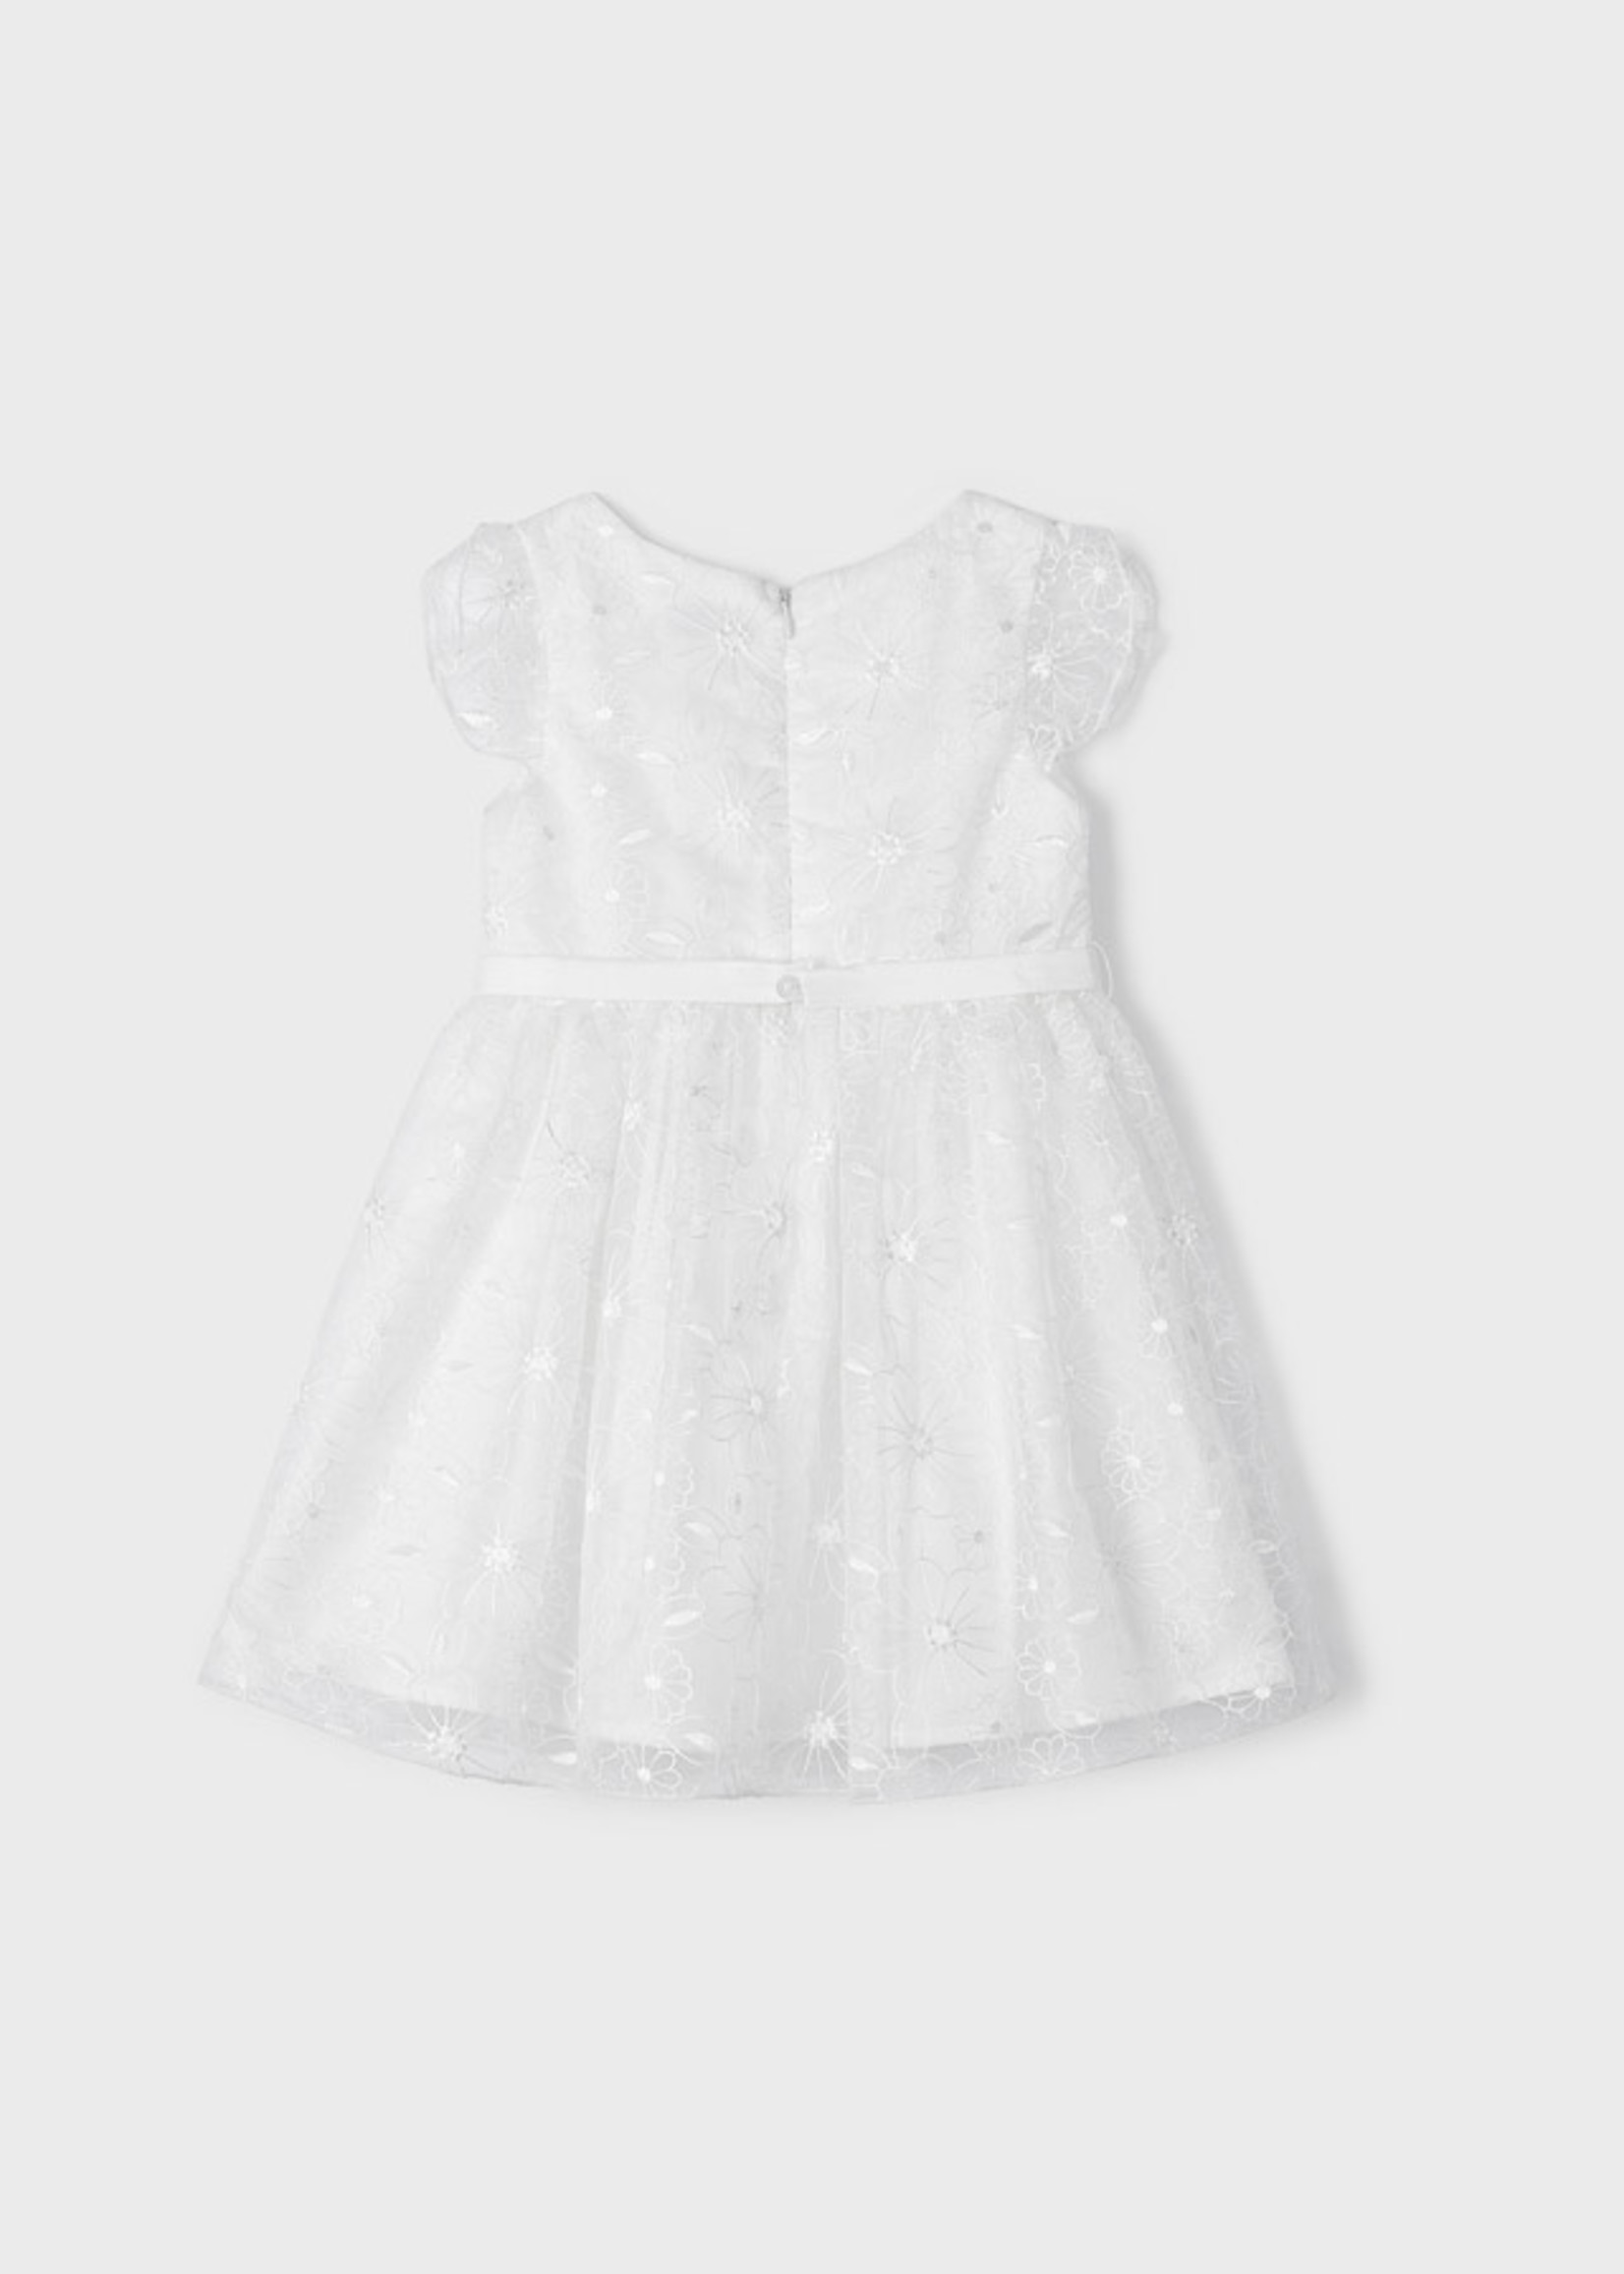 Mayoral embroidered dress white